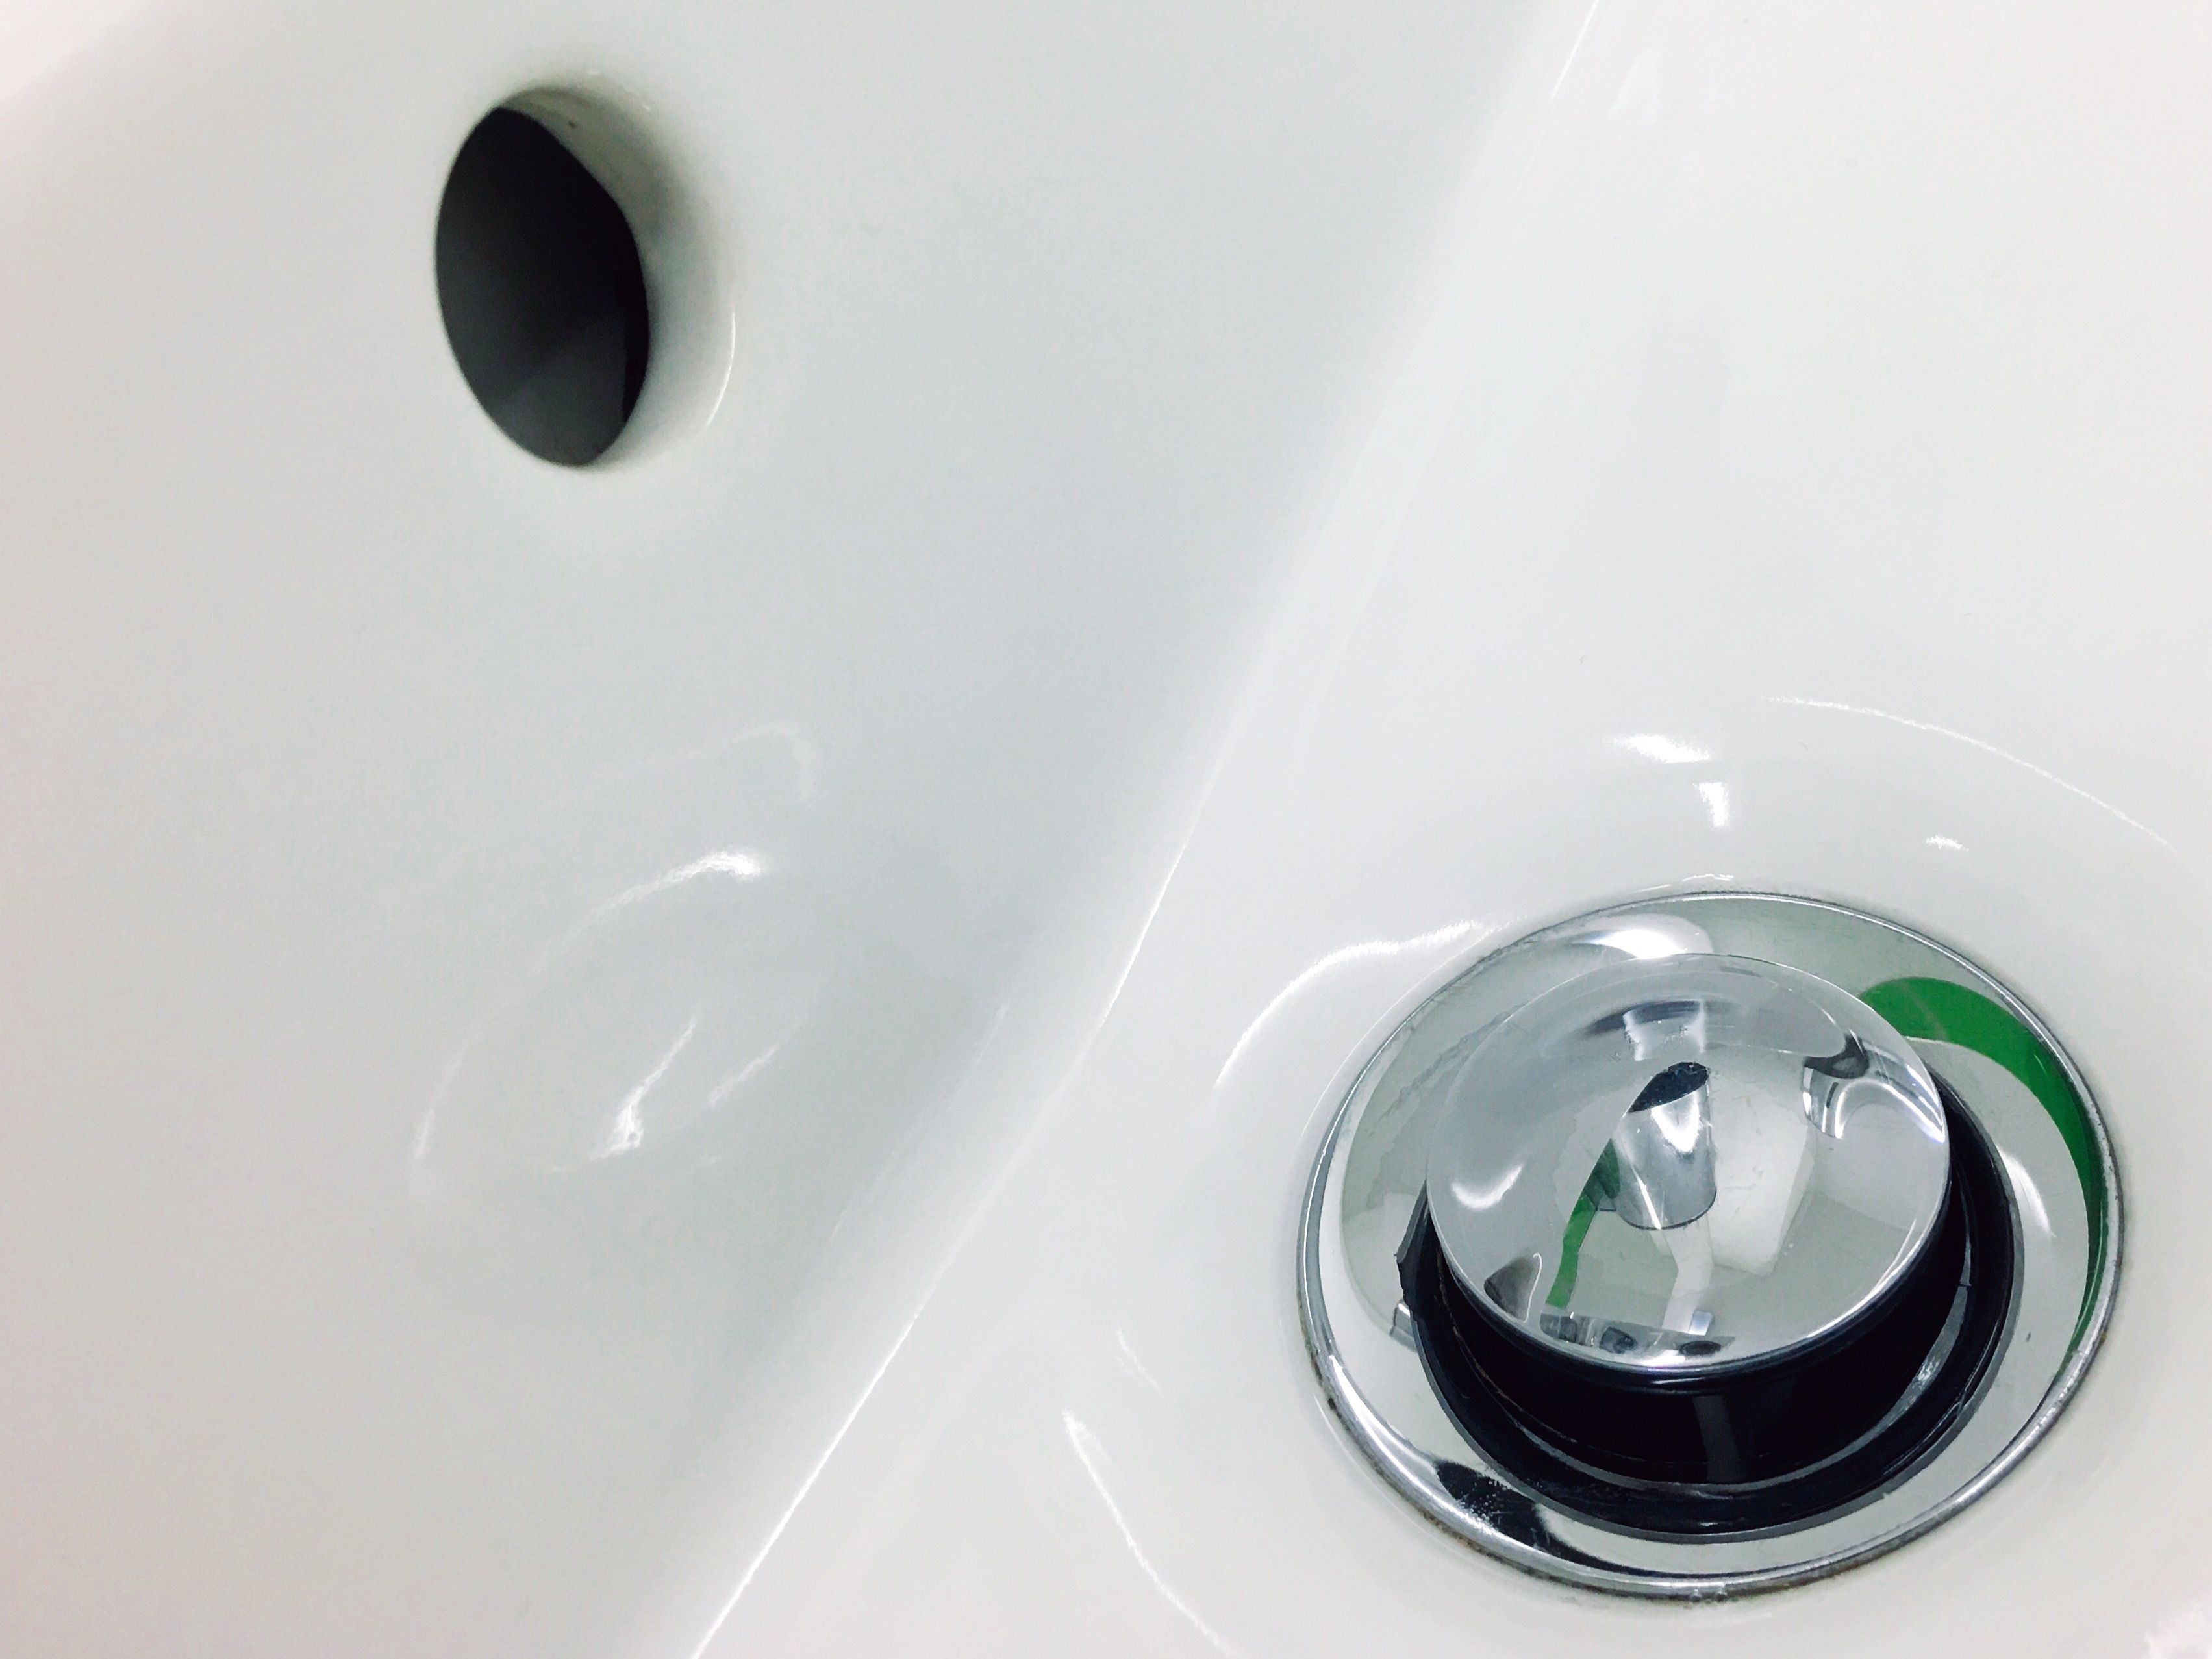 How to Install a Stopper Drain Fitting in a Bathtub